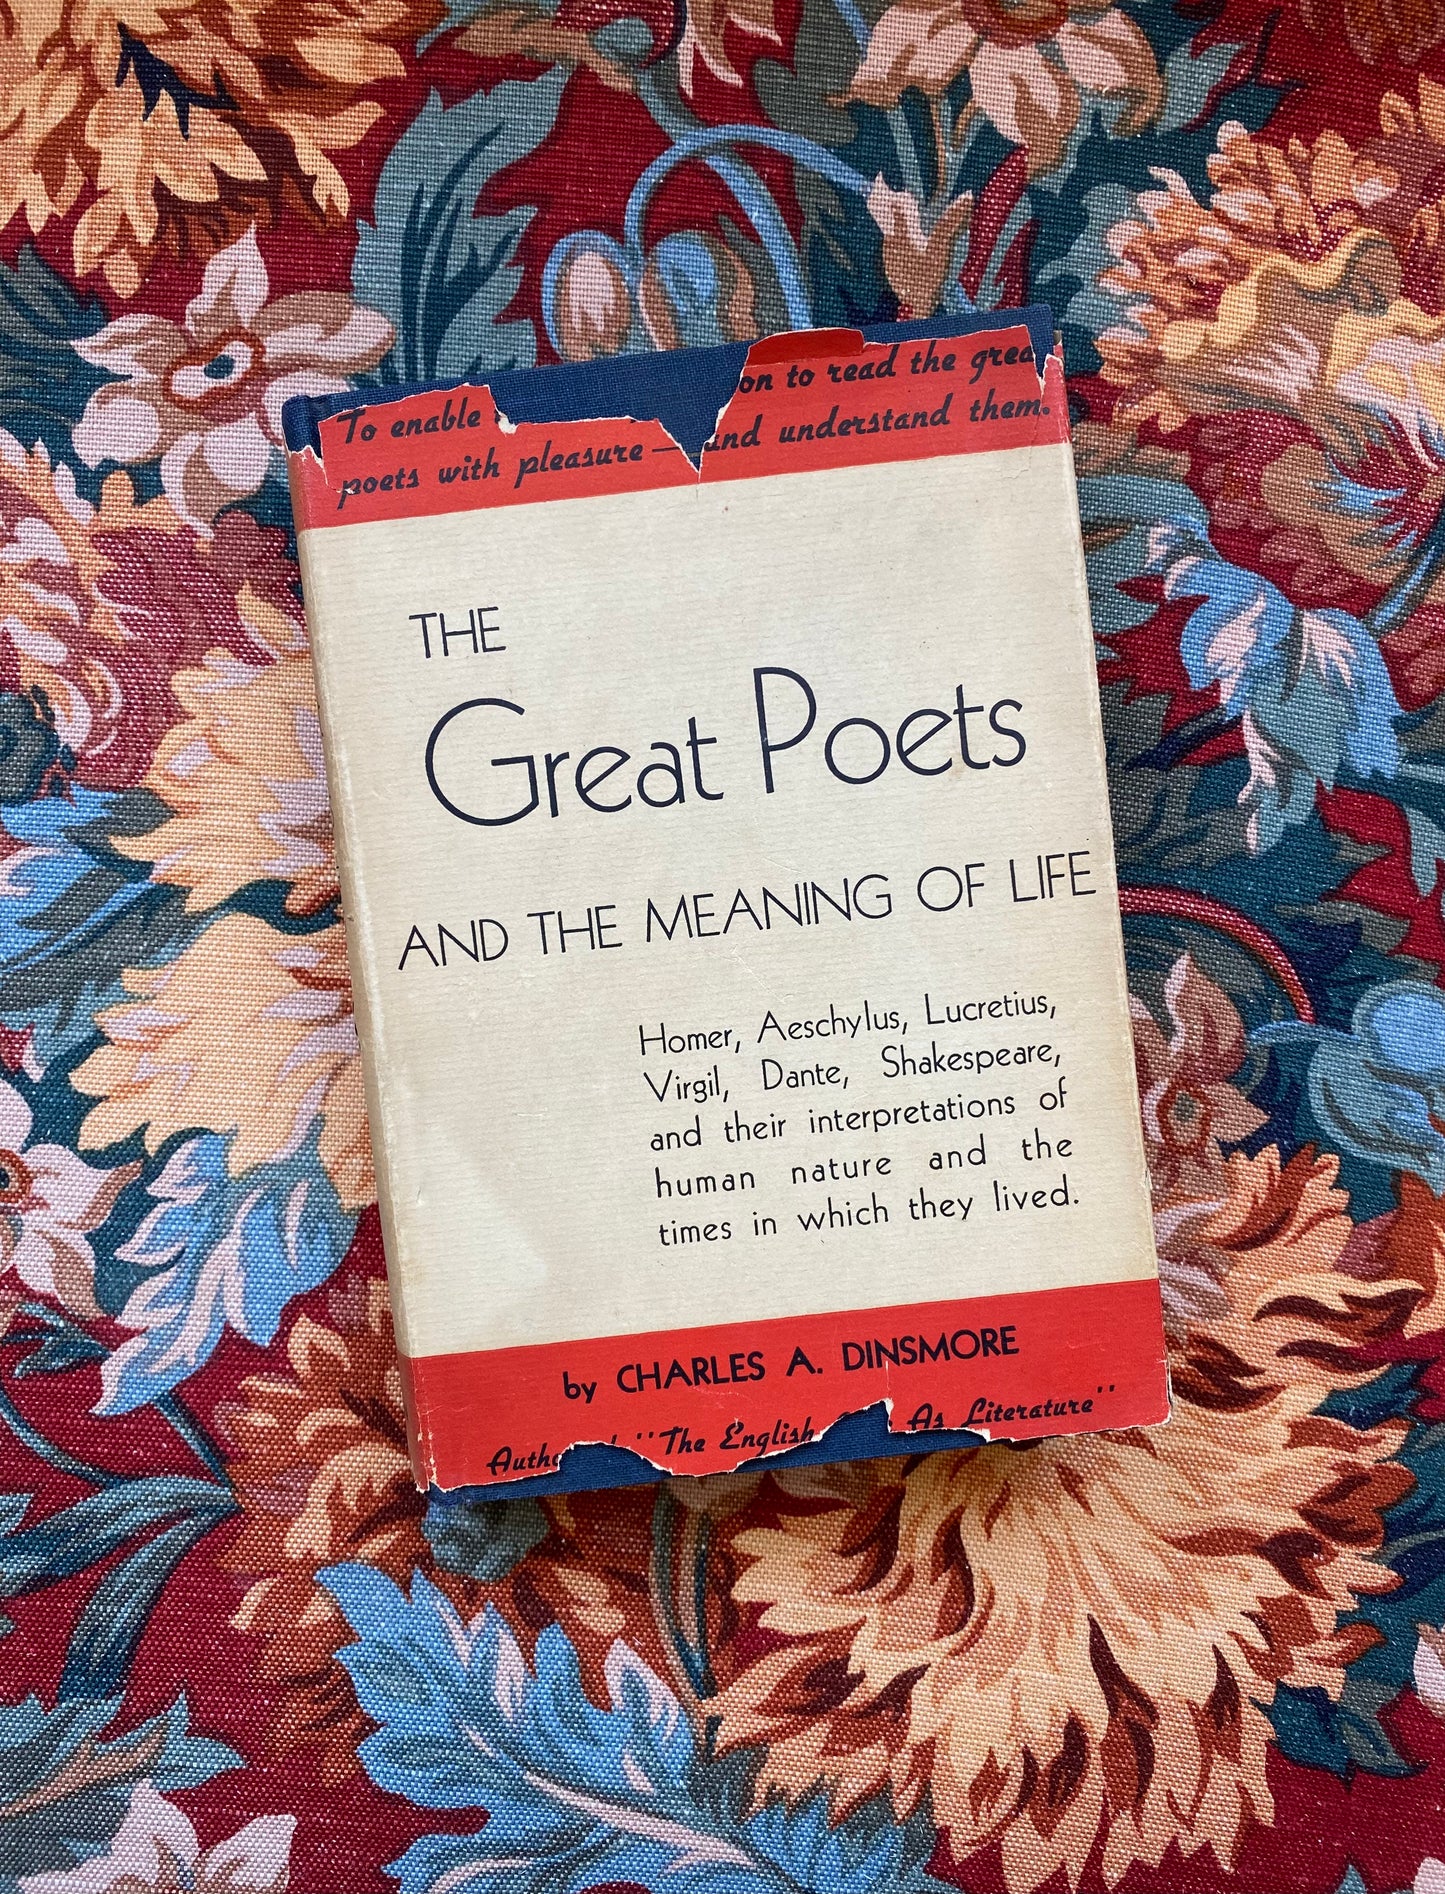 The Great Poets and the Meaning of Life